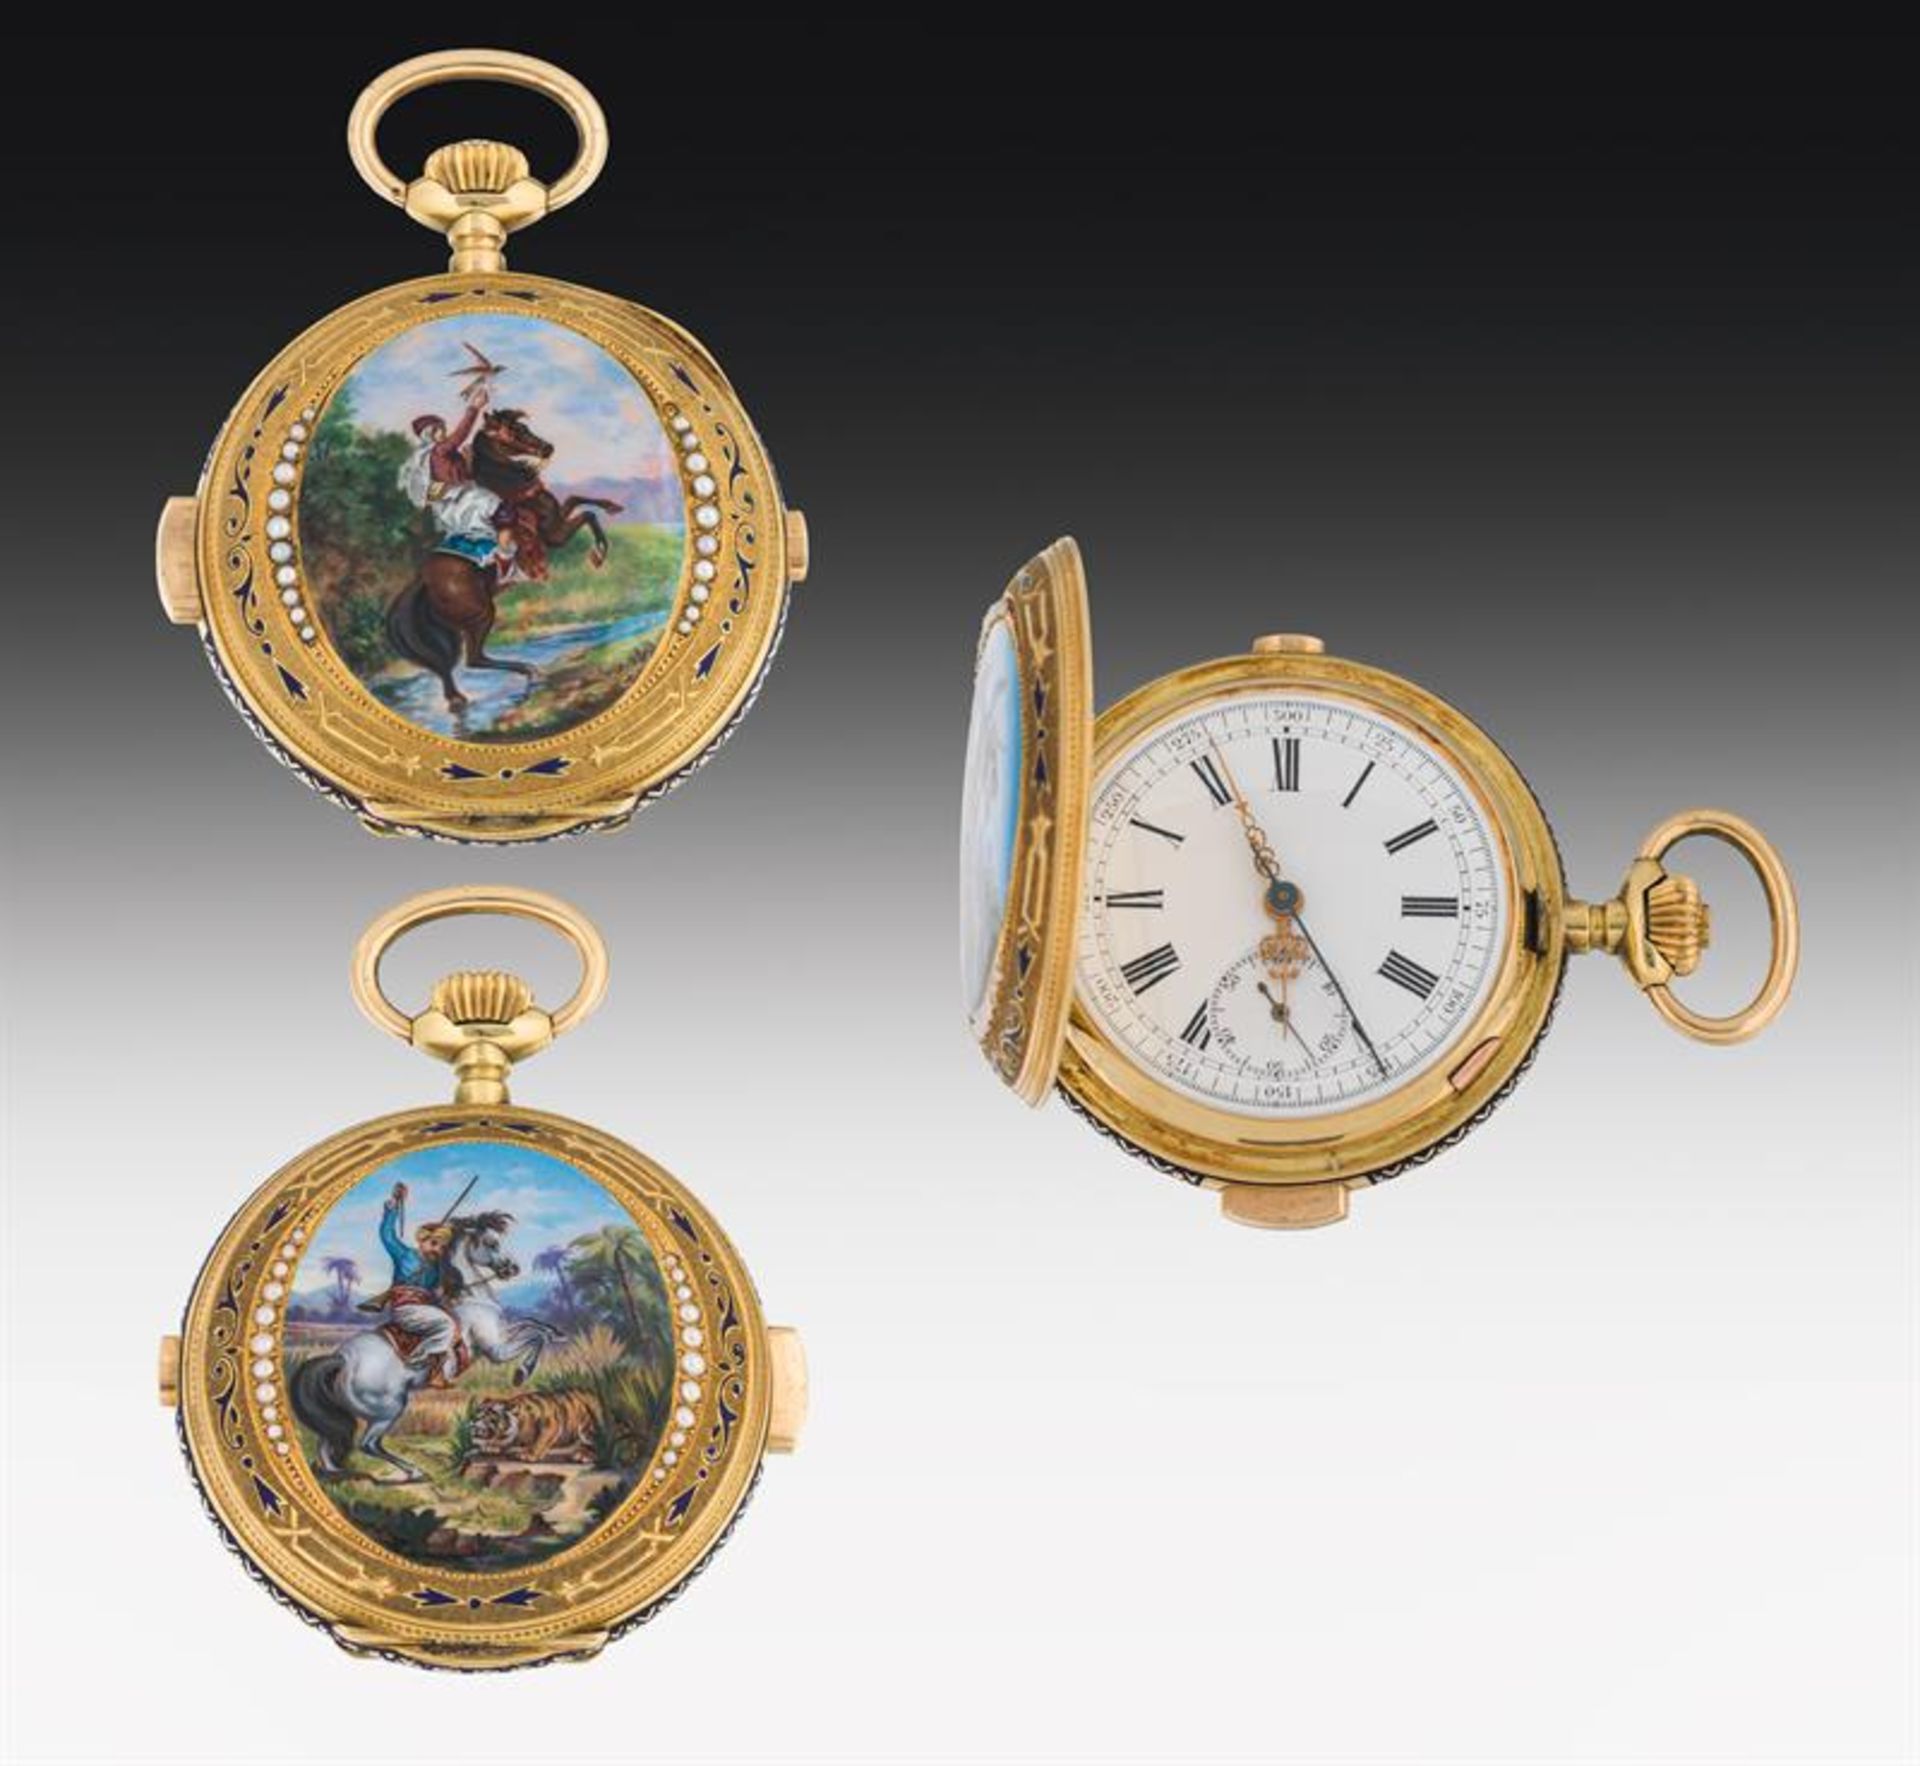 Golden pocket watch with minute repetition and chronograph